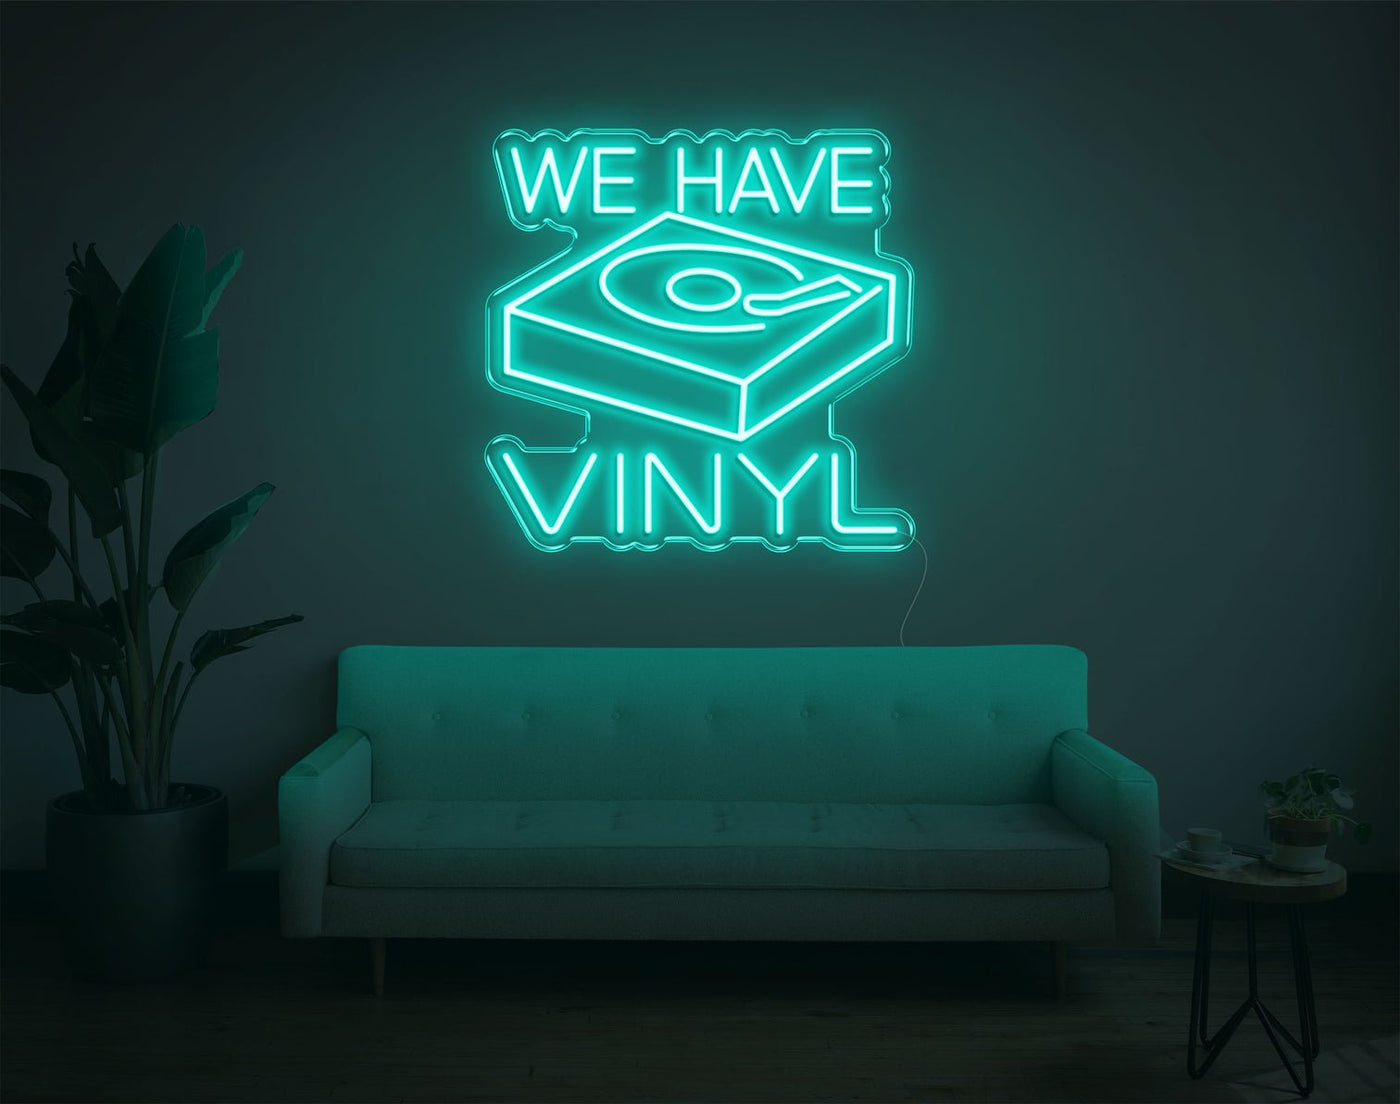 We Have Vinyl LED Neon Sign - 20inch x 20inchTurquoise